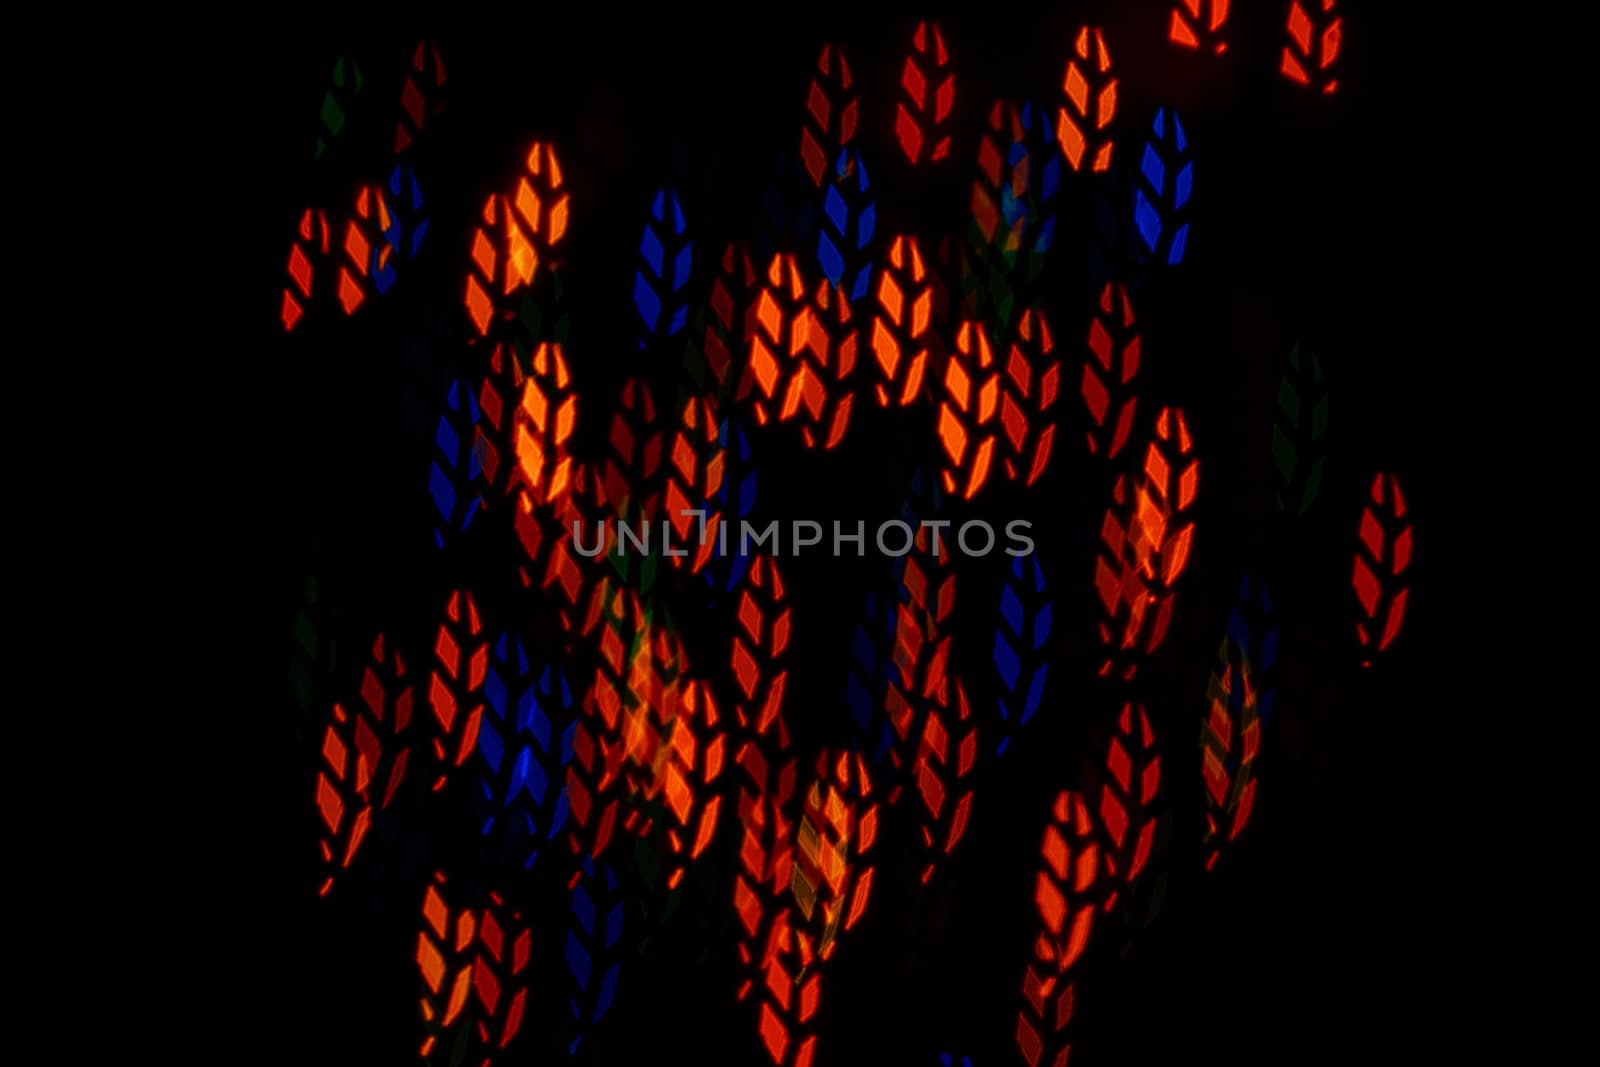 Colorful abstract background in the form of tree leaves shot closeup